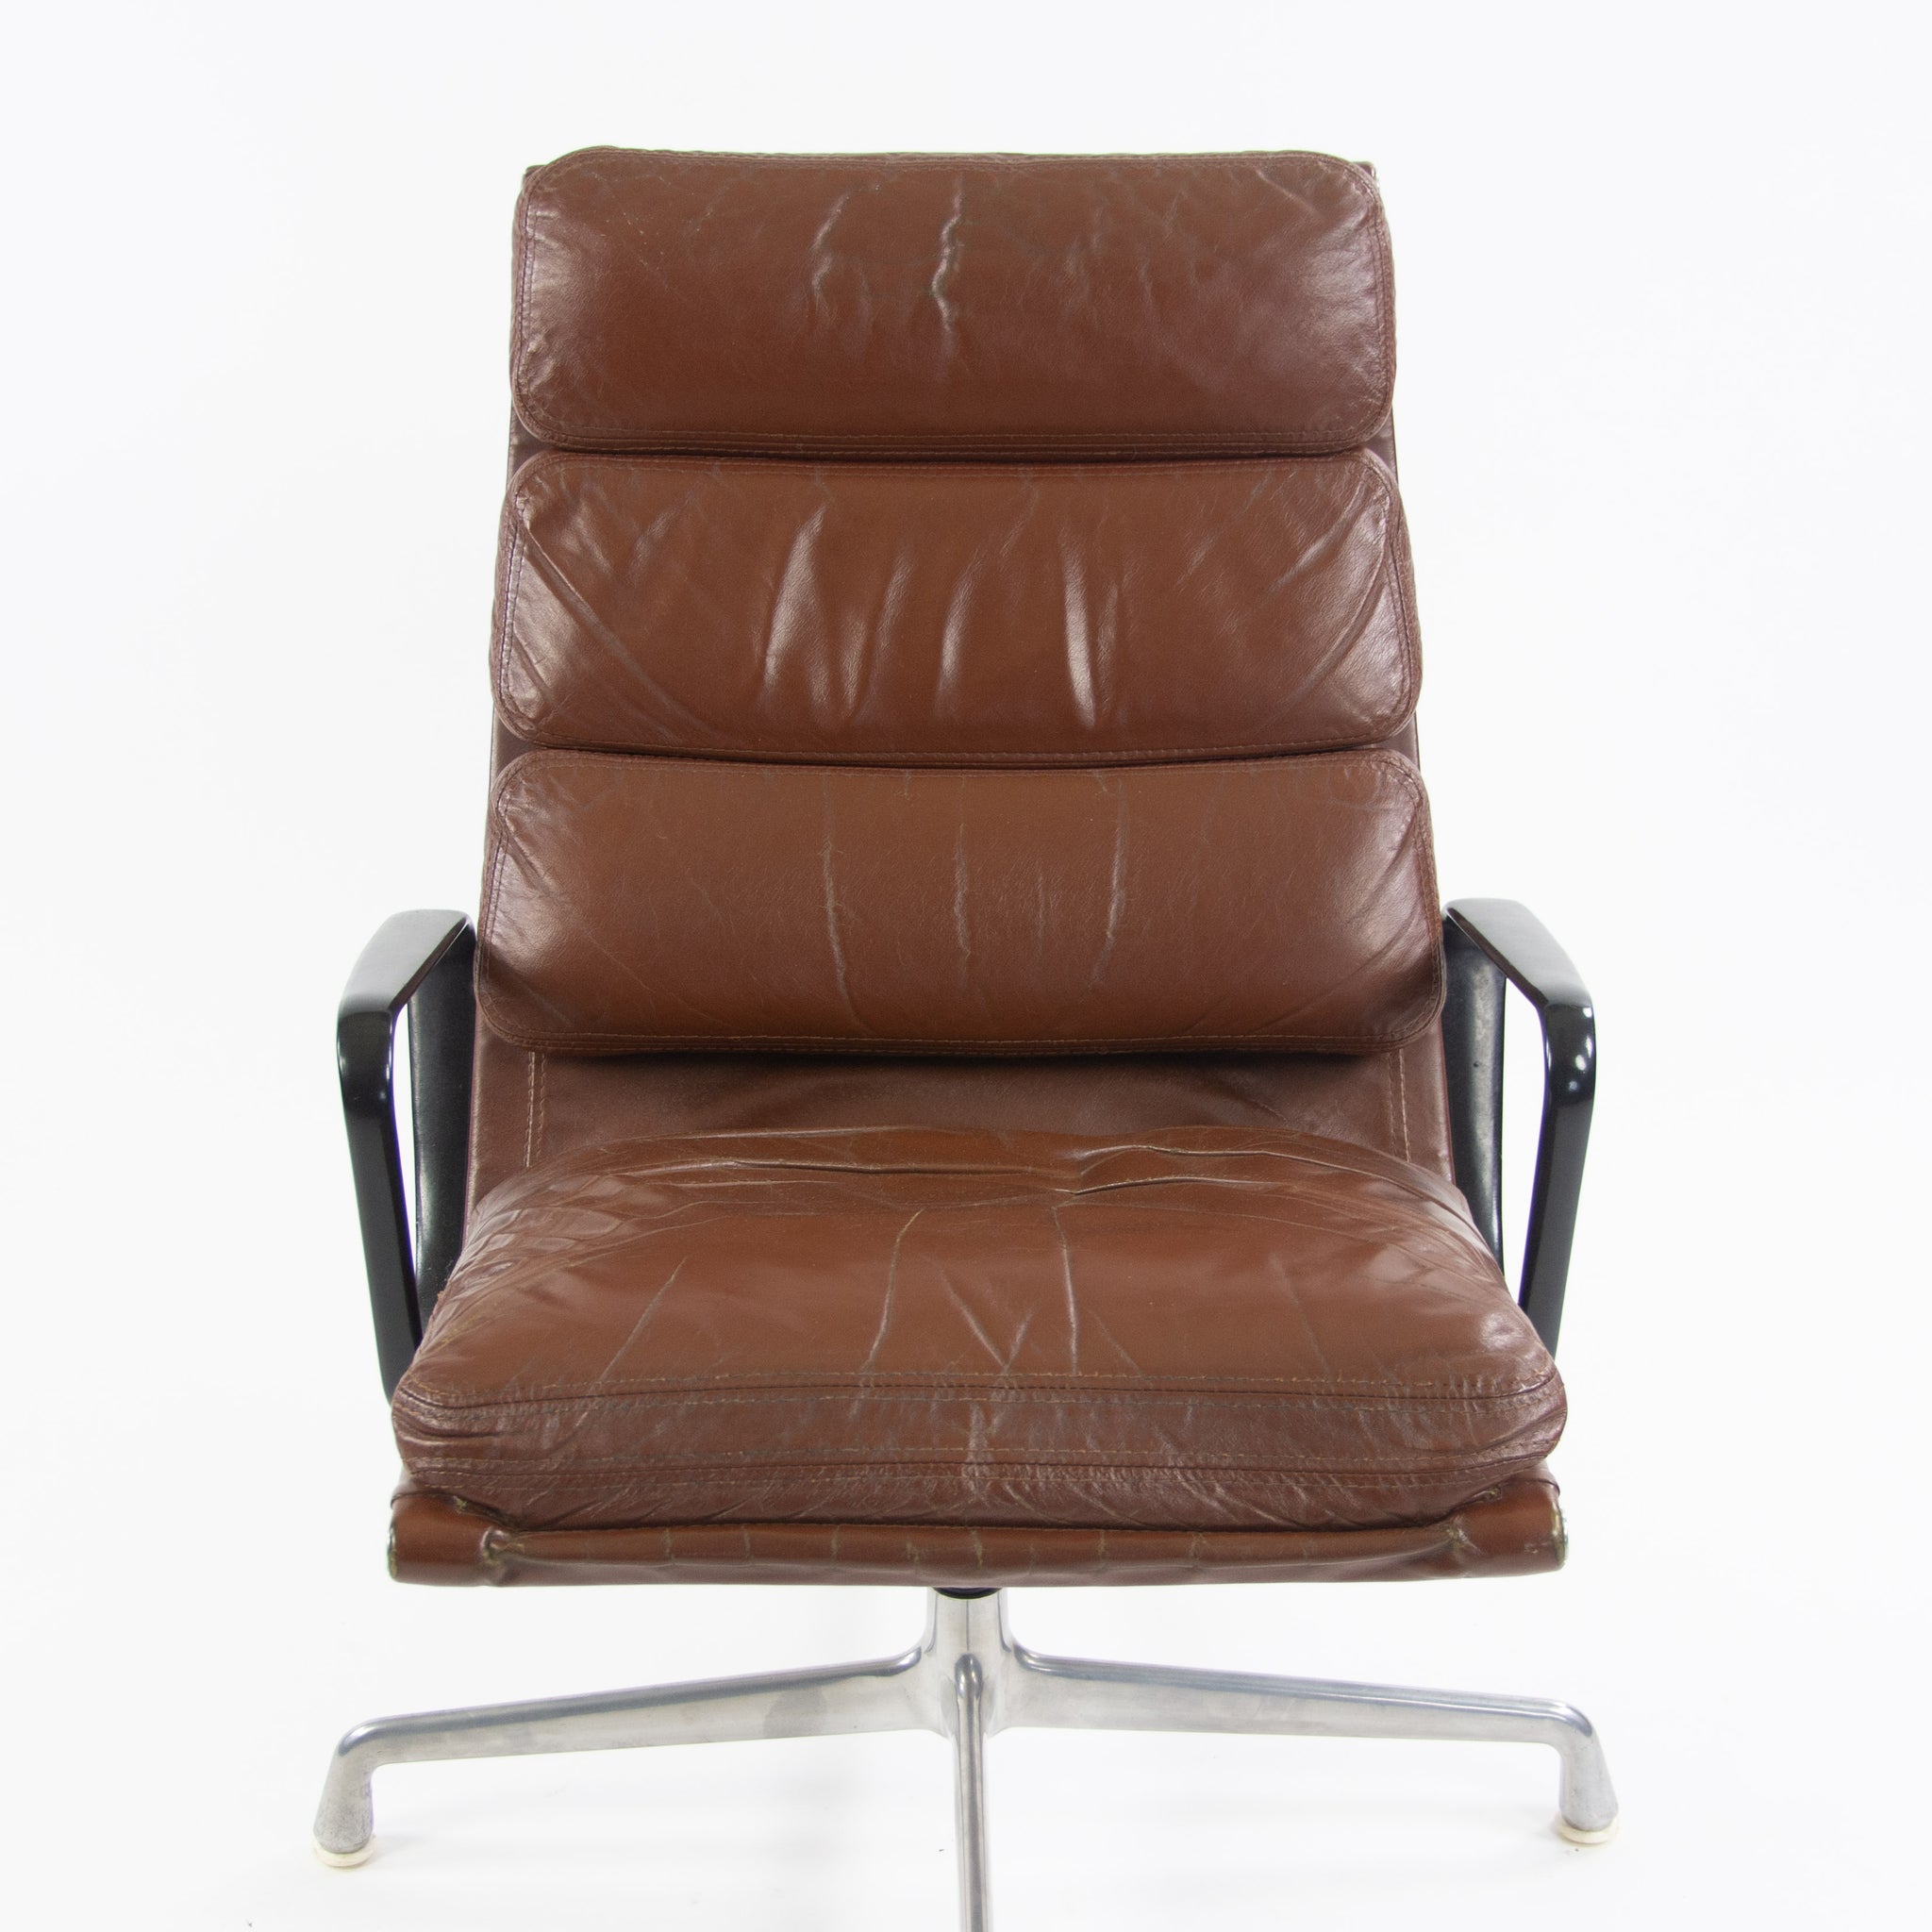 SOLD 1970's Museum Quality Eames Herman Miller Soft Pad Aluminum Lounge Chair Brown